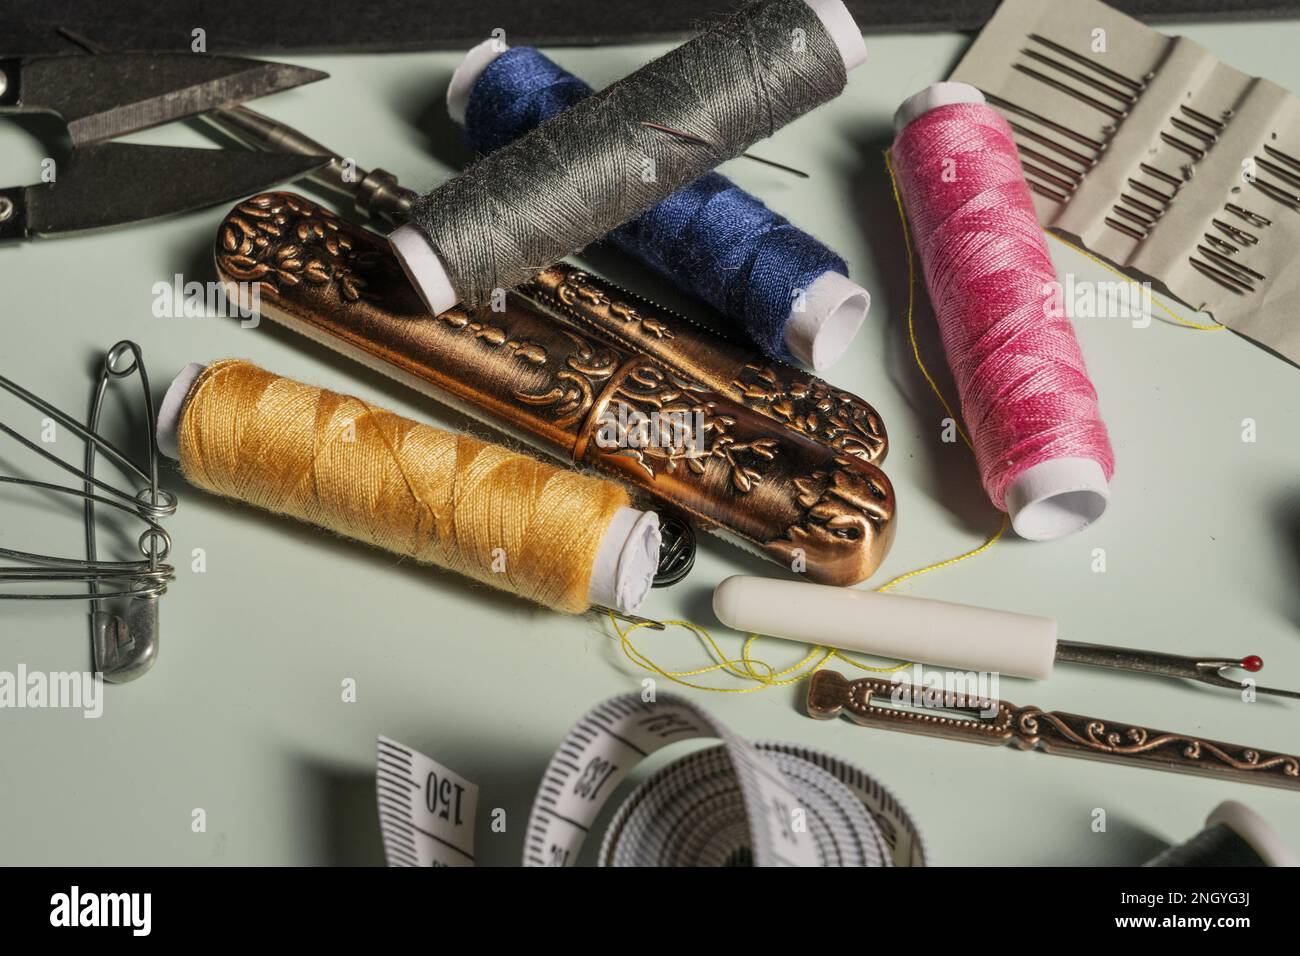 A jumble of typical sewing objects on a blue surface clara Stock Photo